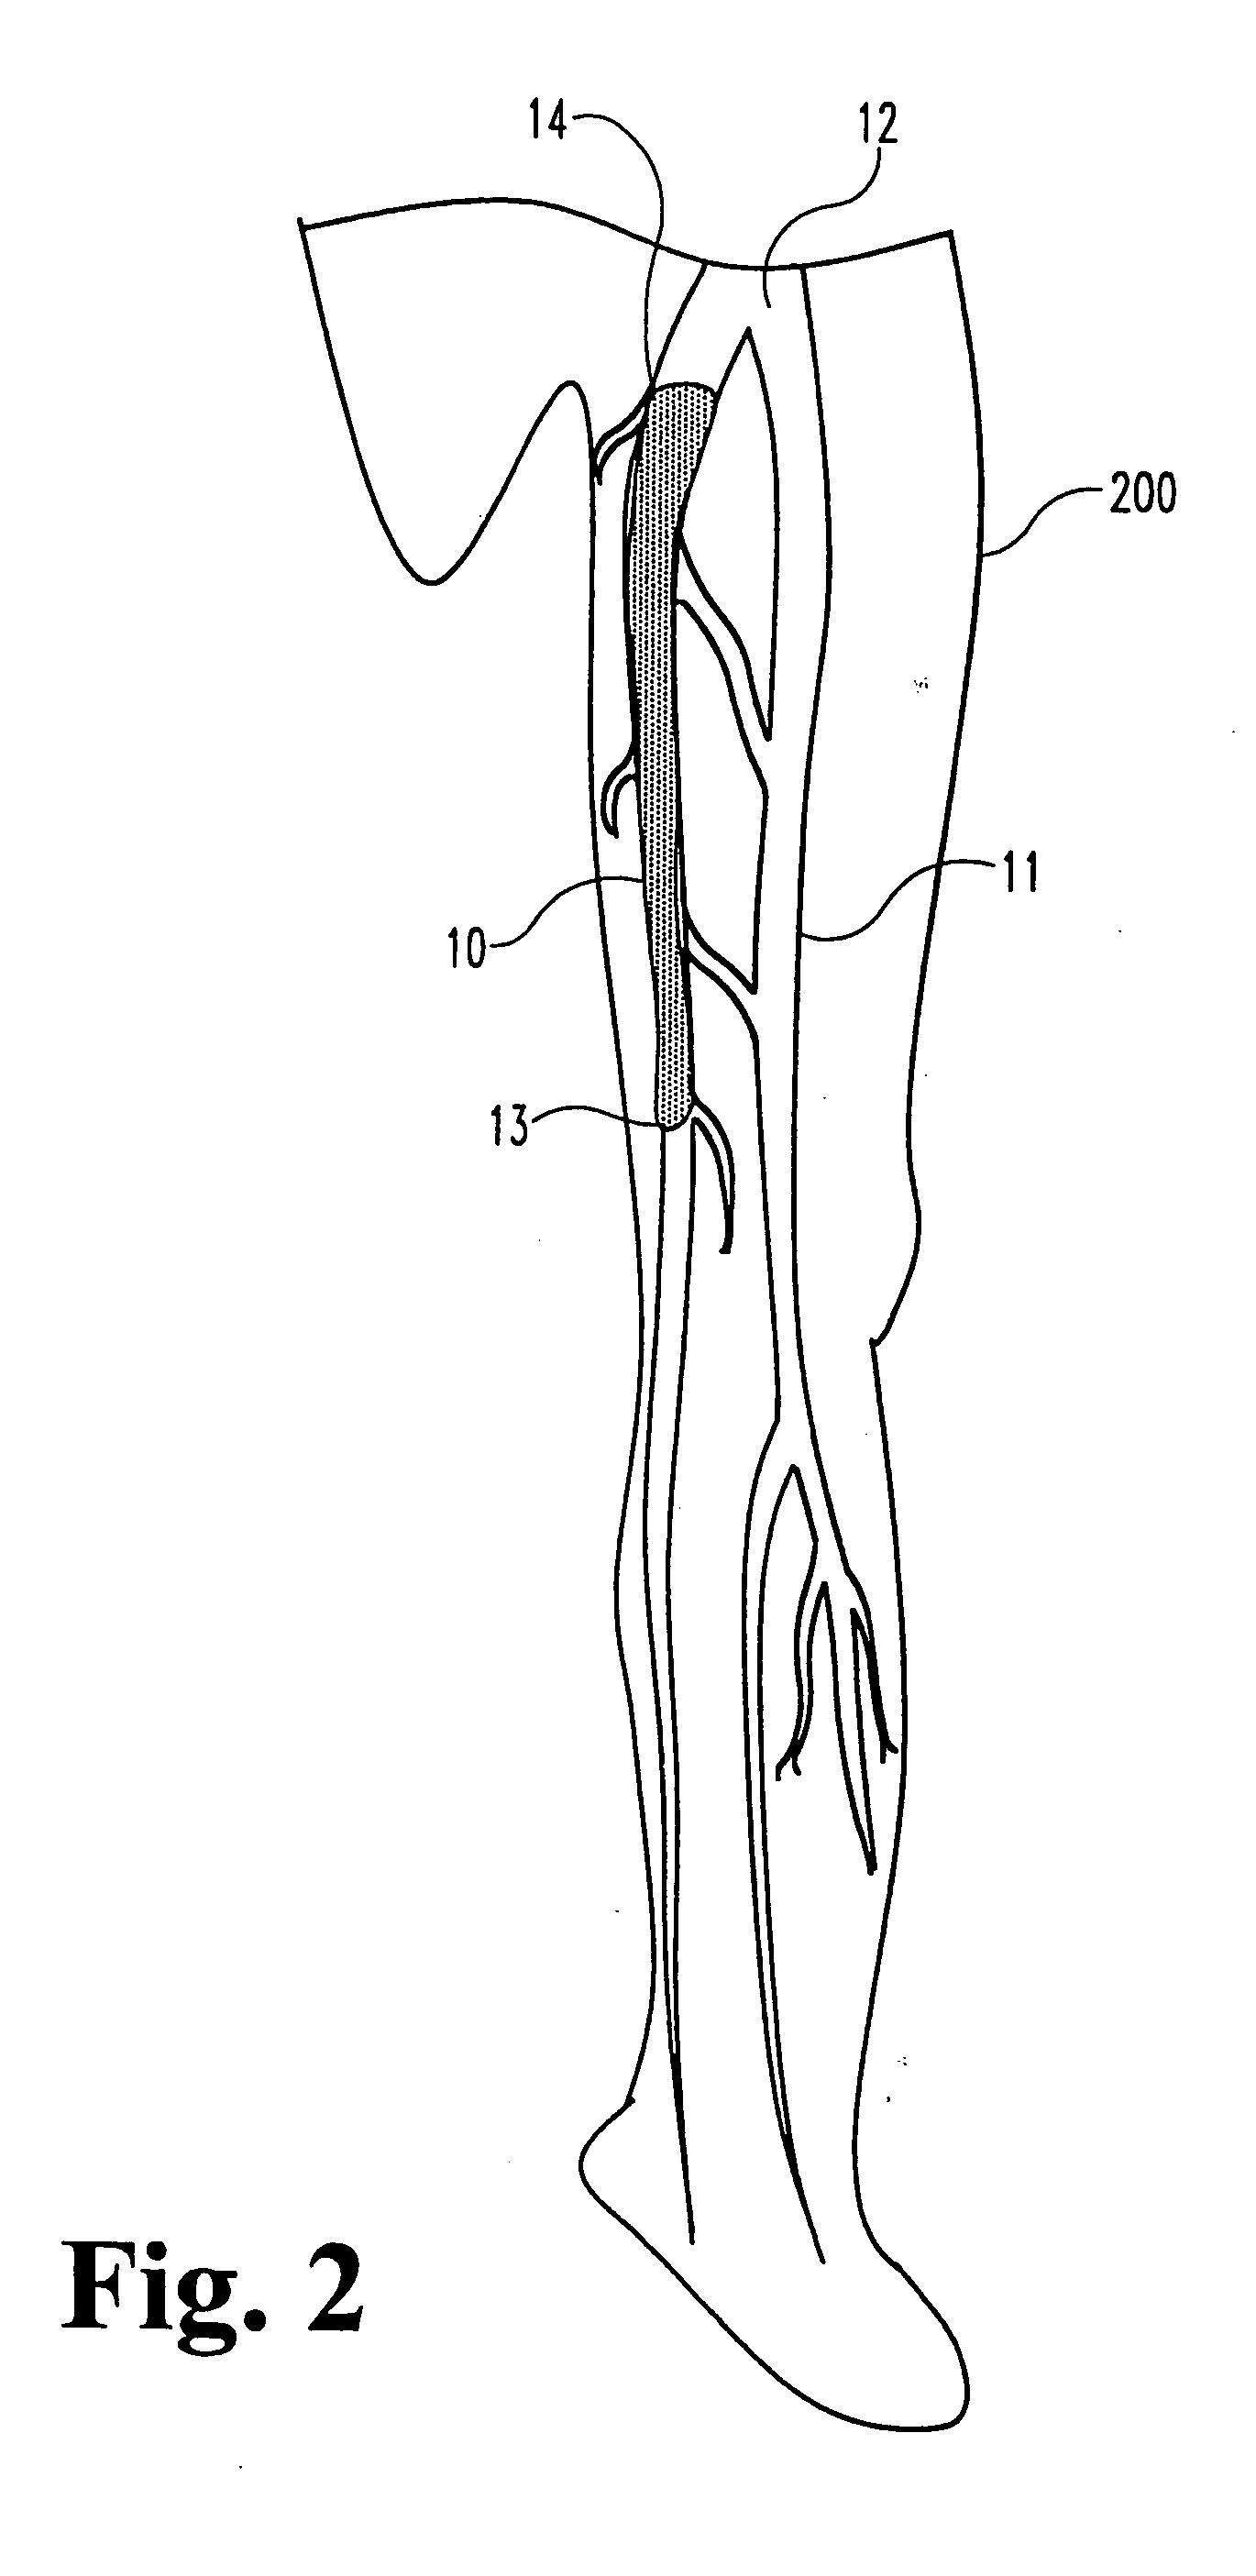 Vascular occlusion methods, systems and devices